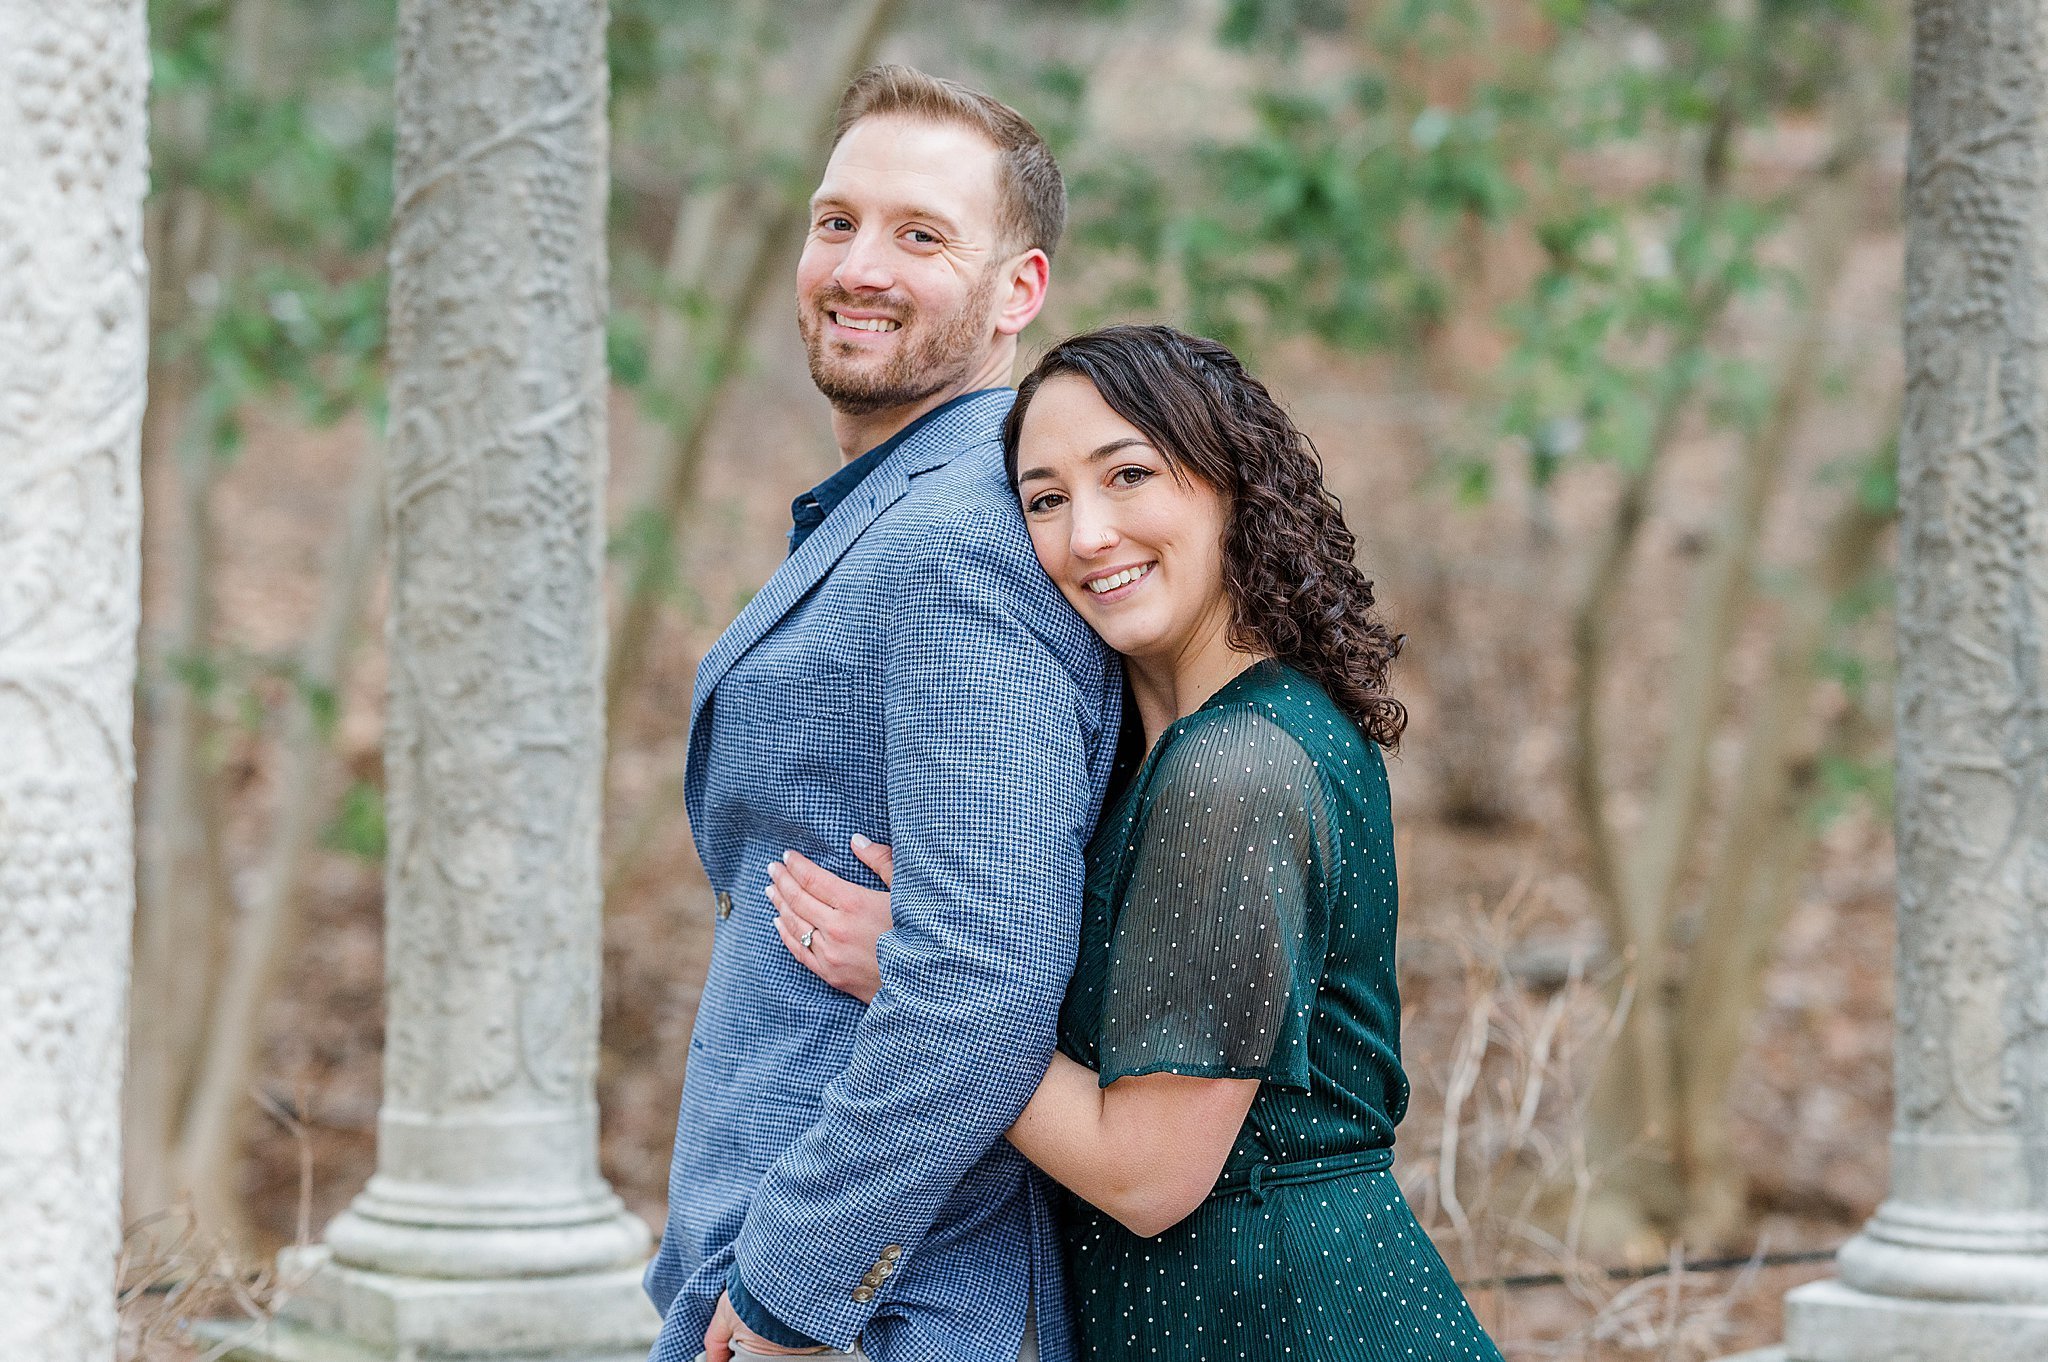 Longwood Gardens Winter Engagement Session Photography Session_4169.jpg